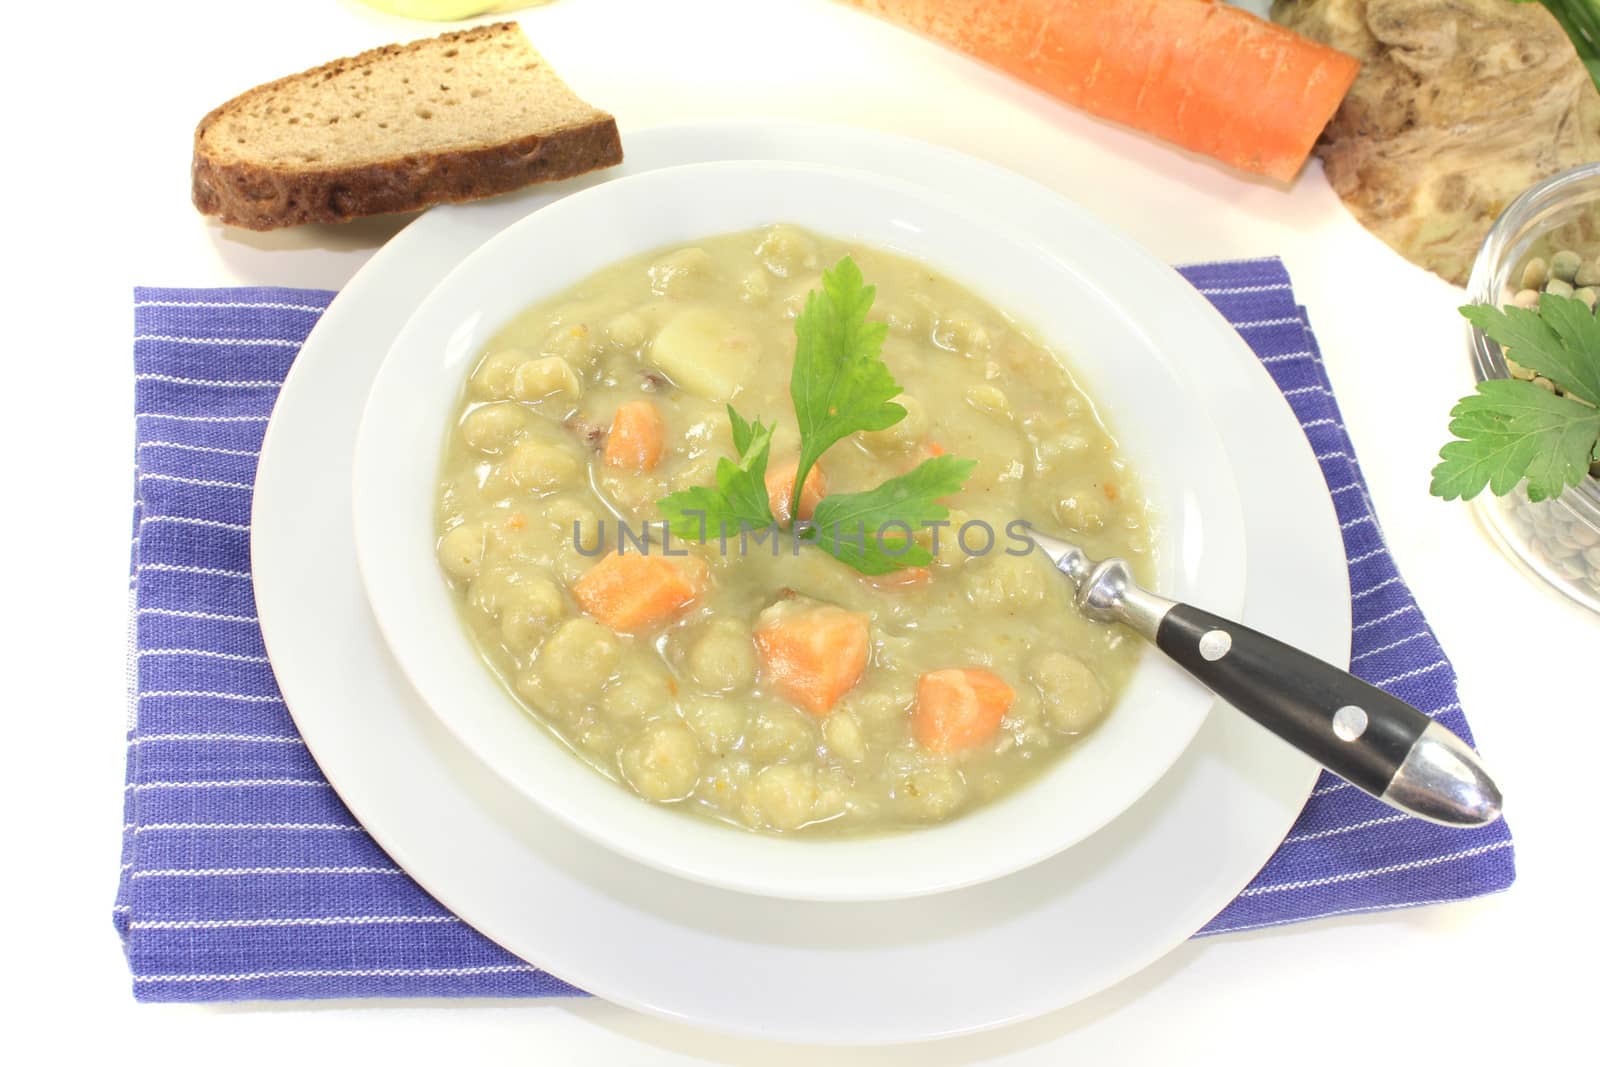 Pea soup with celery by discovery